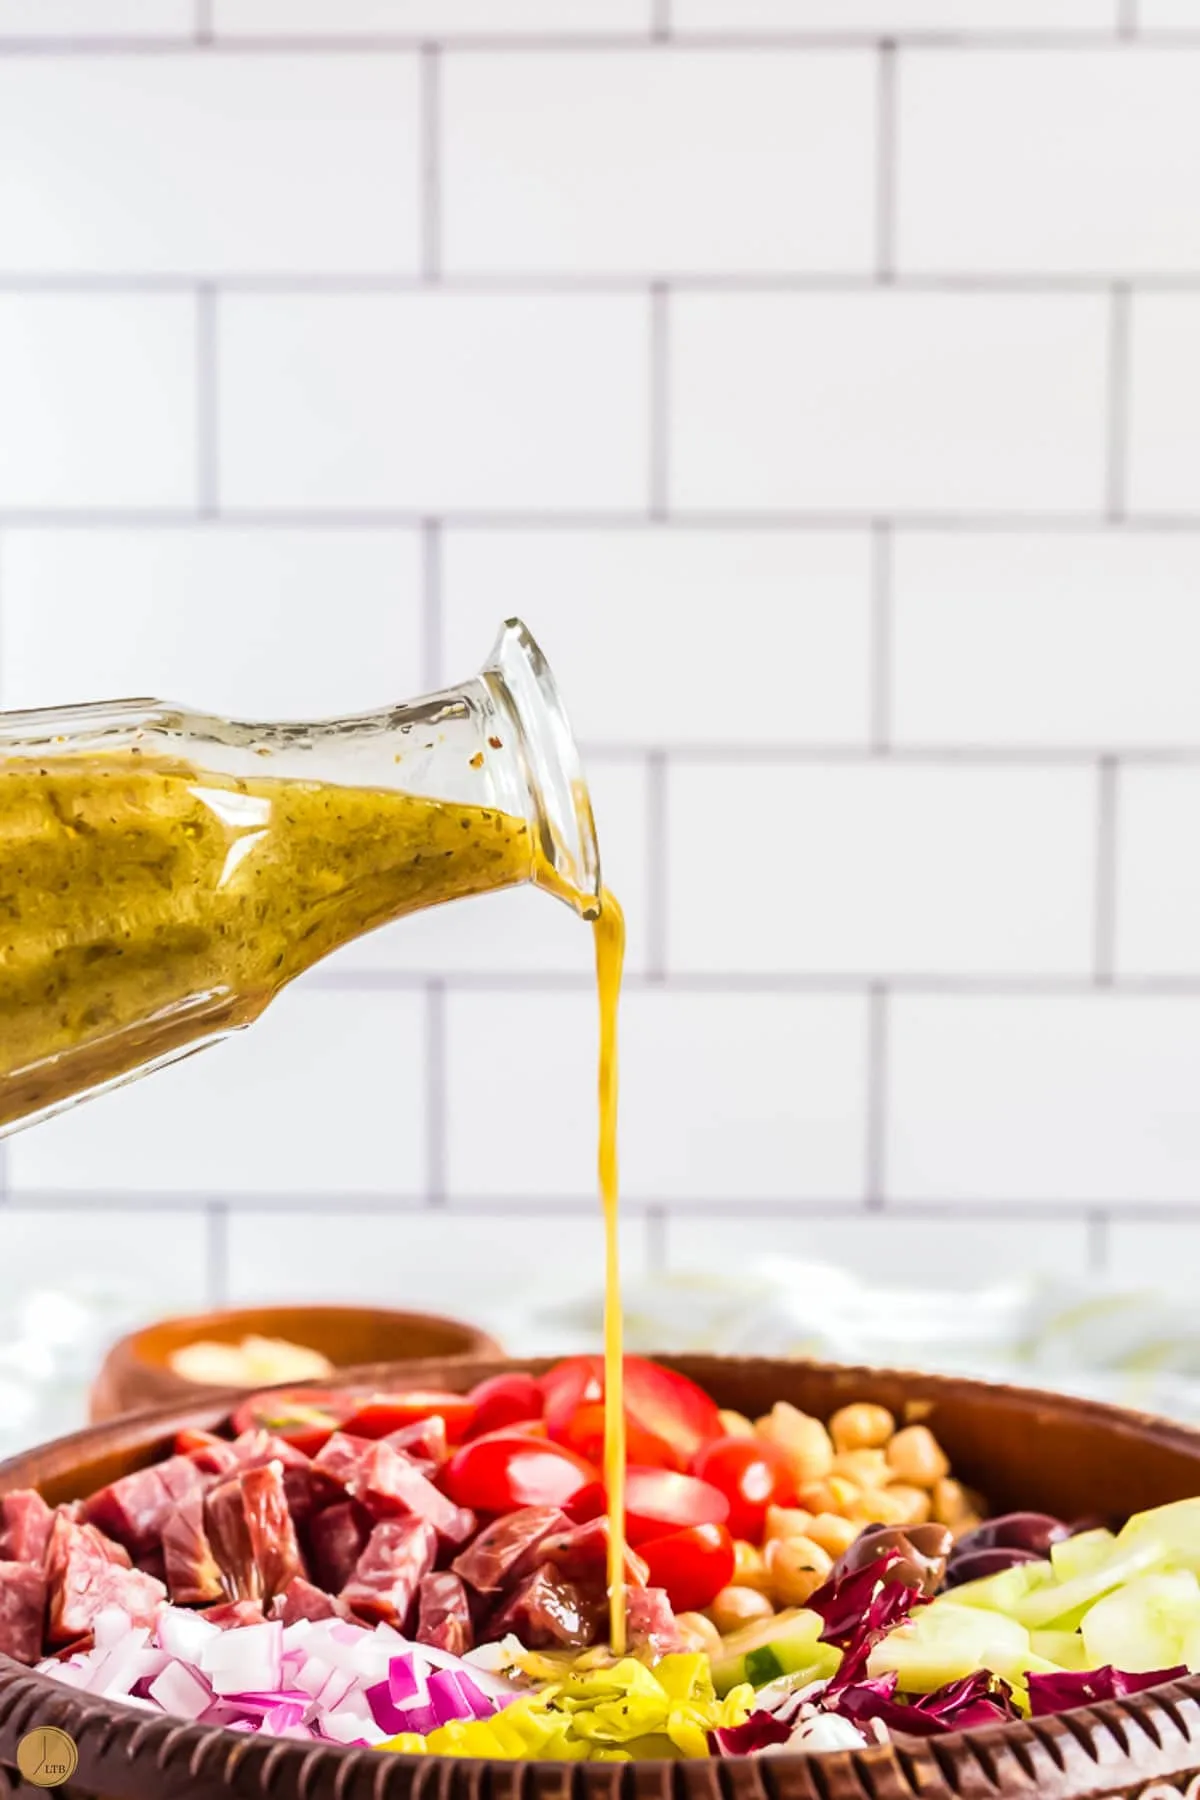 homemade italian salad dressing is better than store-bought dressings